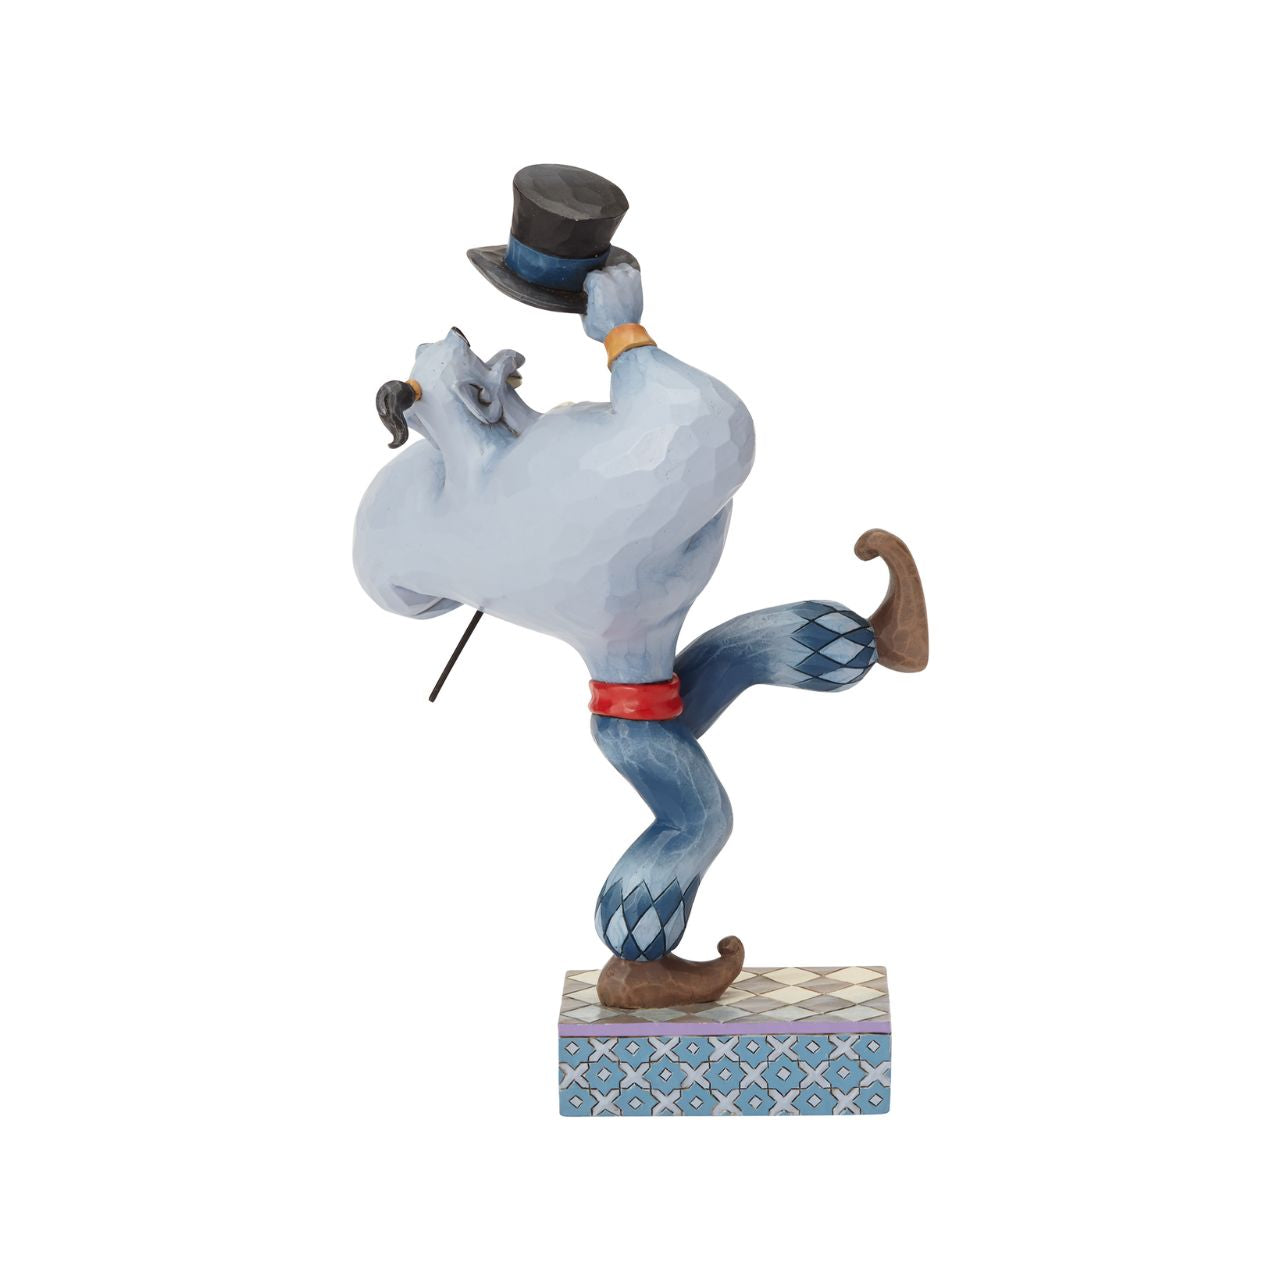 Disney's Aladdin Born Showman Genie Figurine by Jim Shore  You ain't never had a friend like Genie. Jim Shore captures his fun, comical spirit, as he dances along with a cane and top hat, entertaining his adoring audience. Make your wishes come true with this playful Genie from Disney's Aladdin in your magical collection.